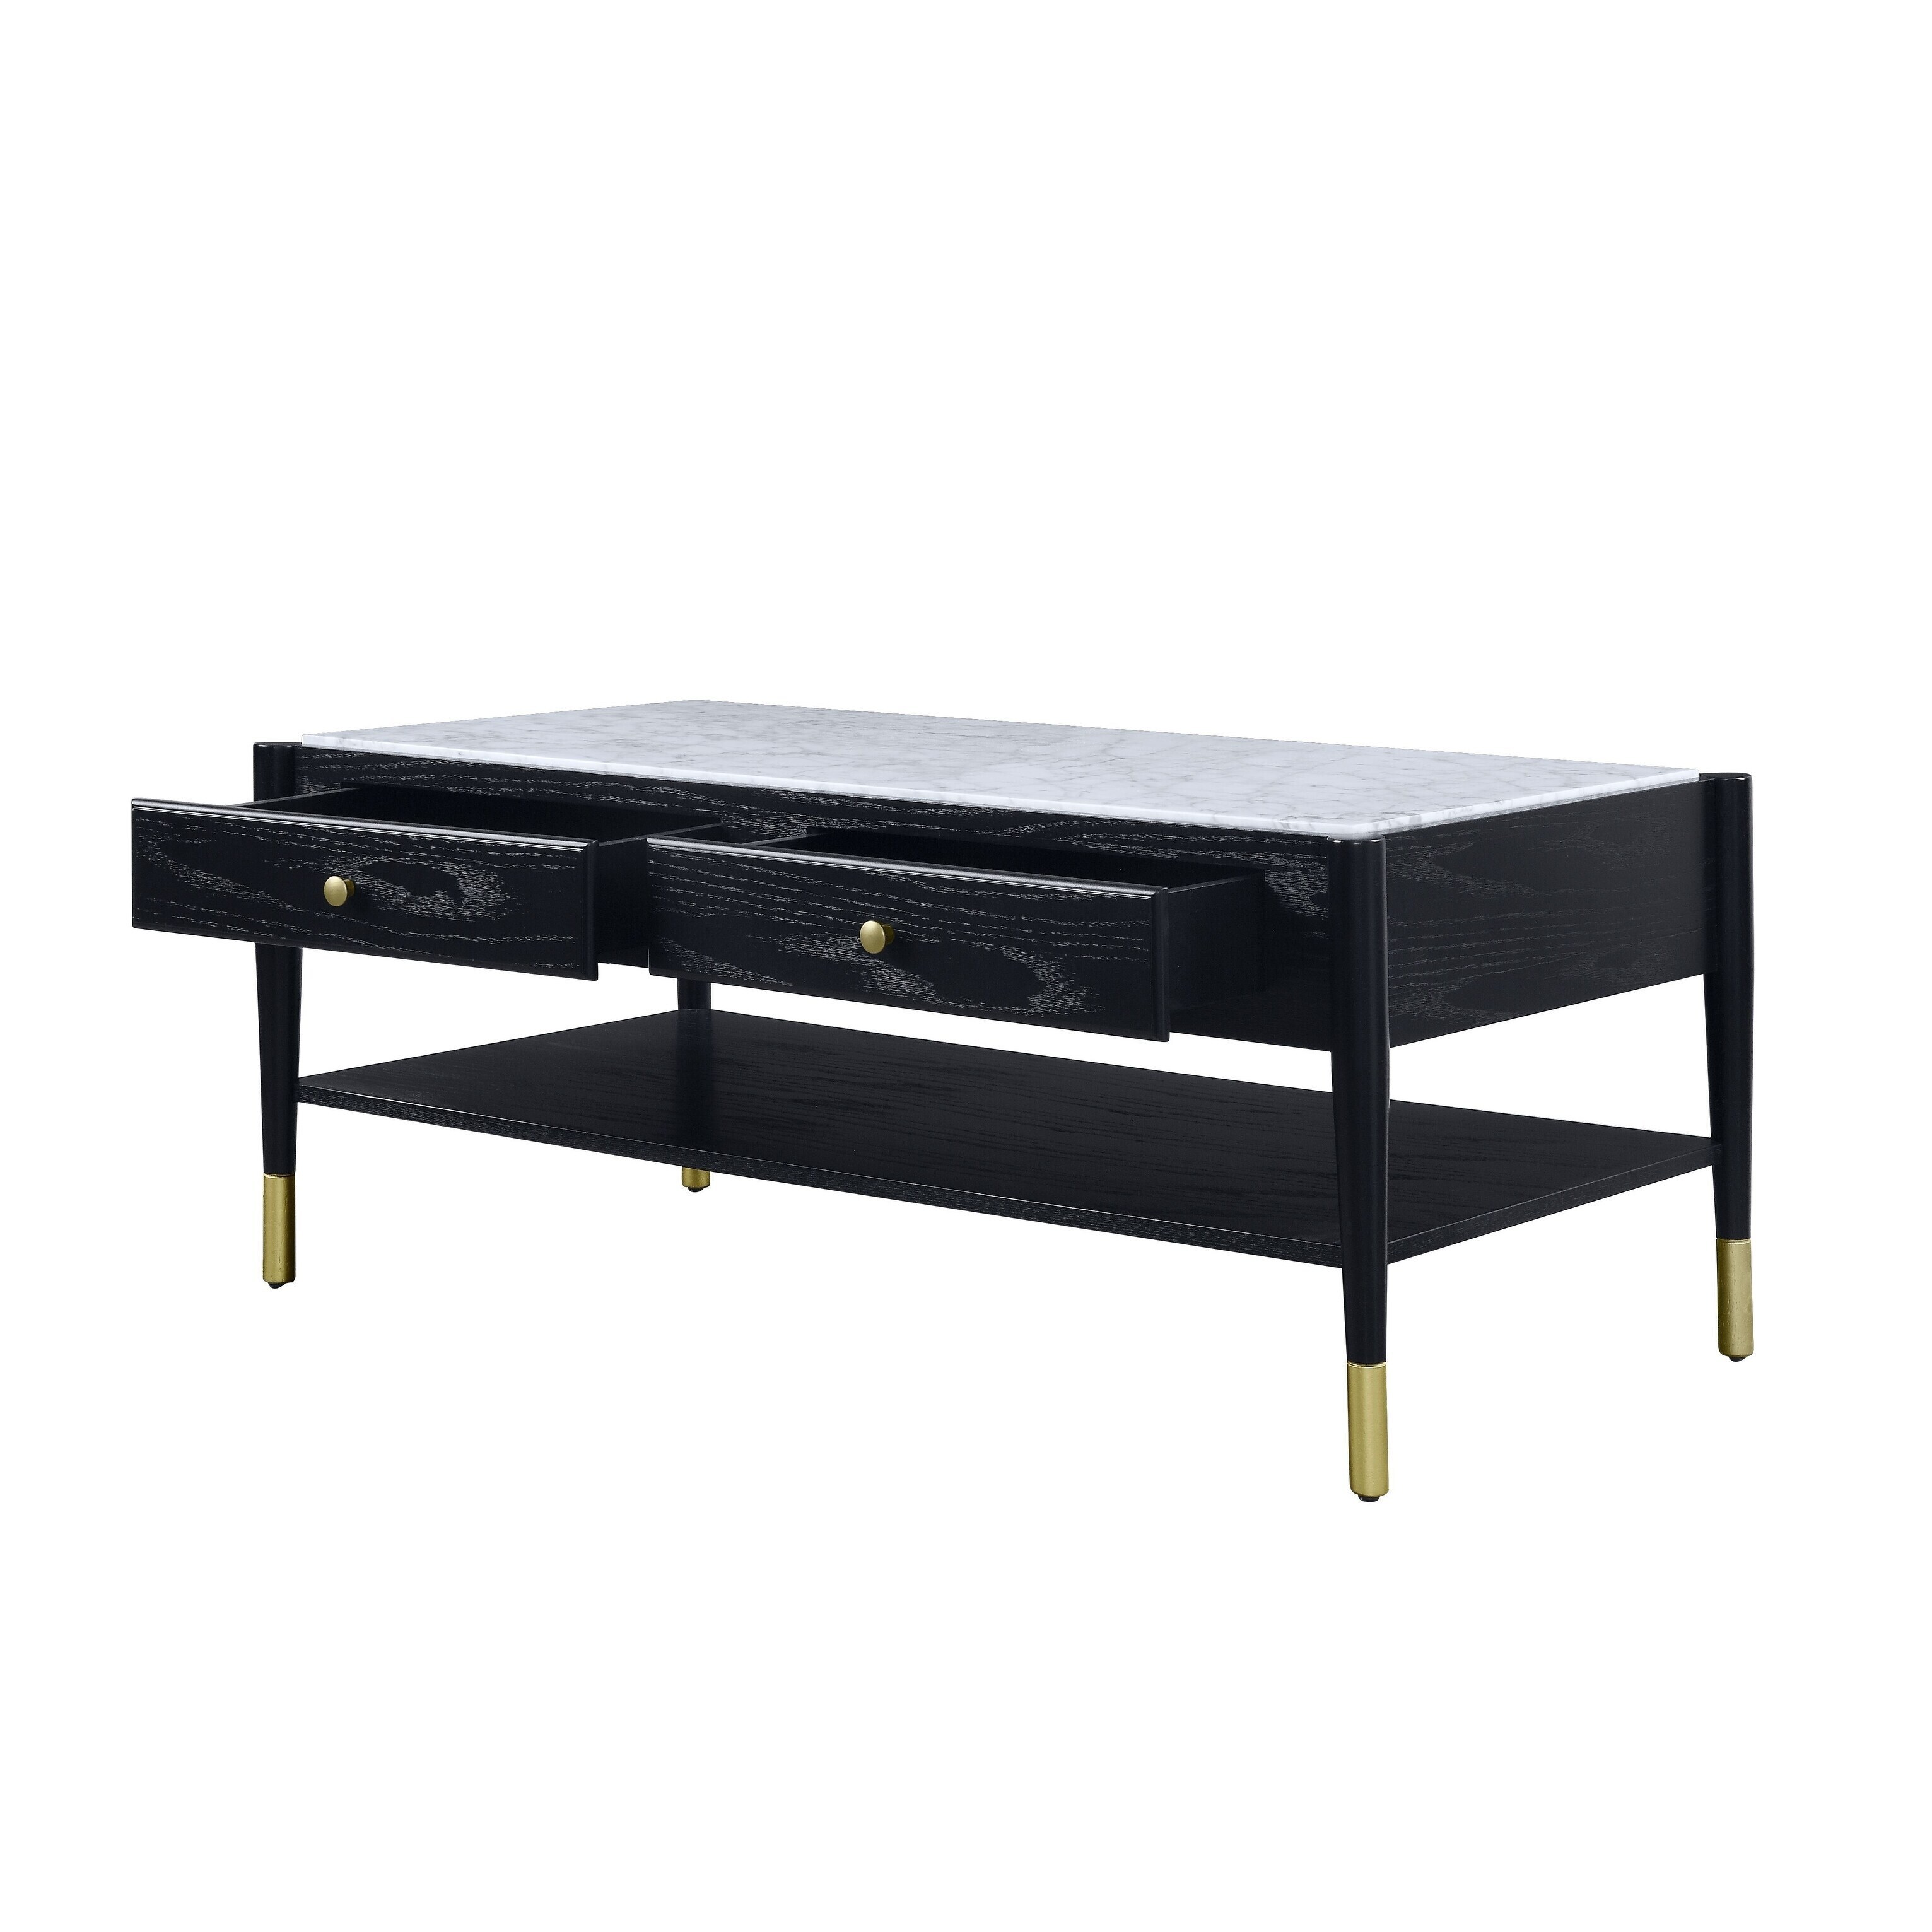 Black wooden coffee table with marble top & drawers